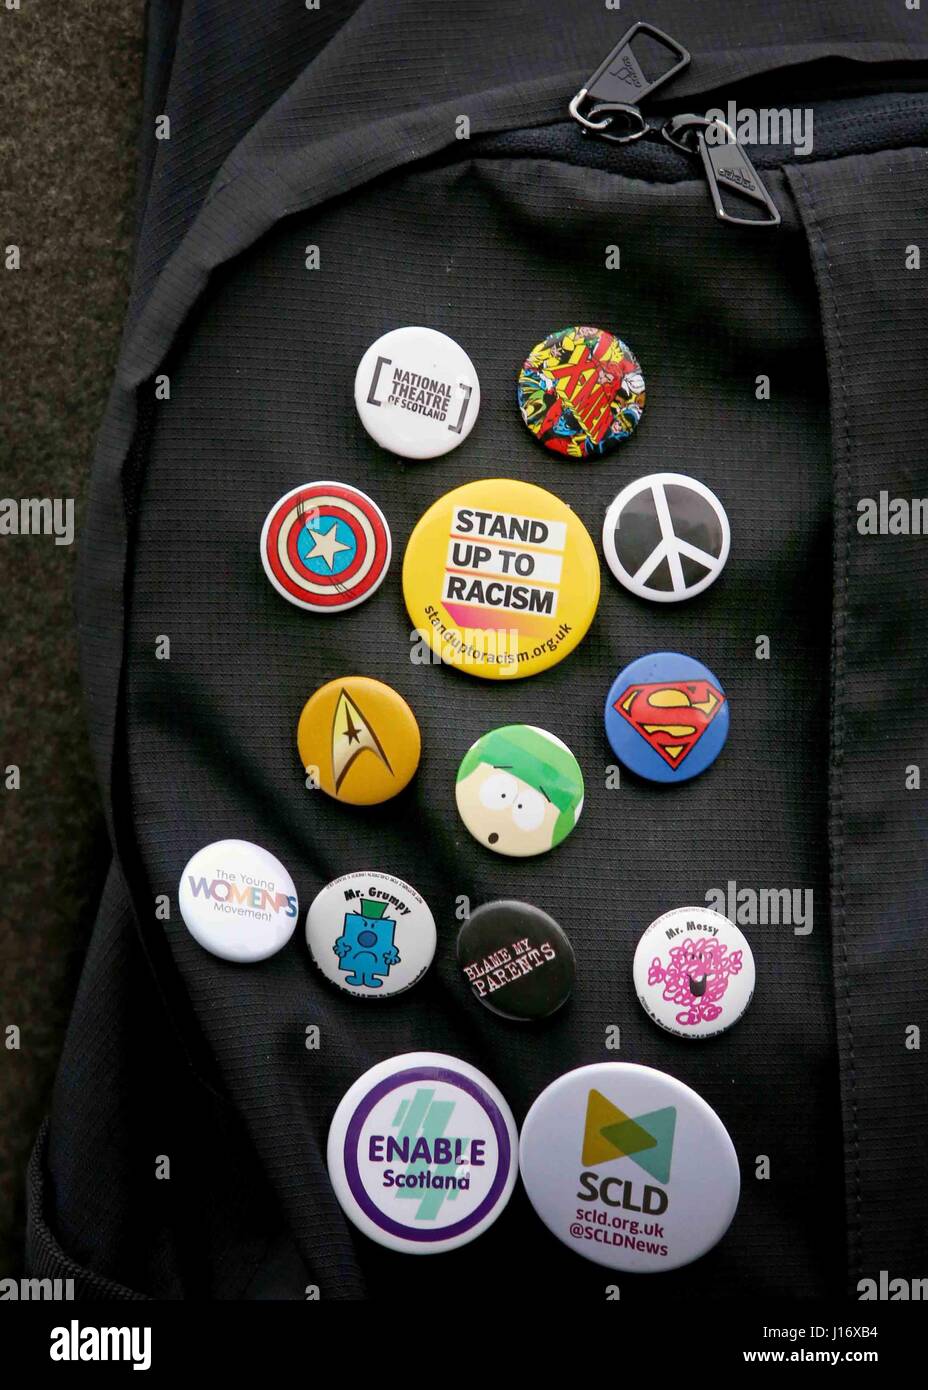 A general view of badges in a backpack Stock Photo - Alamy